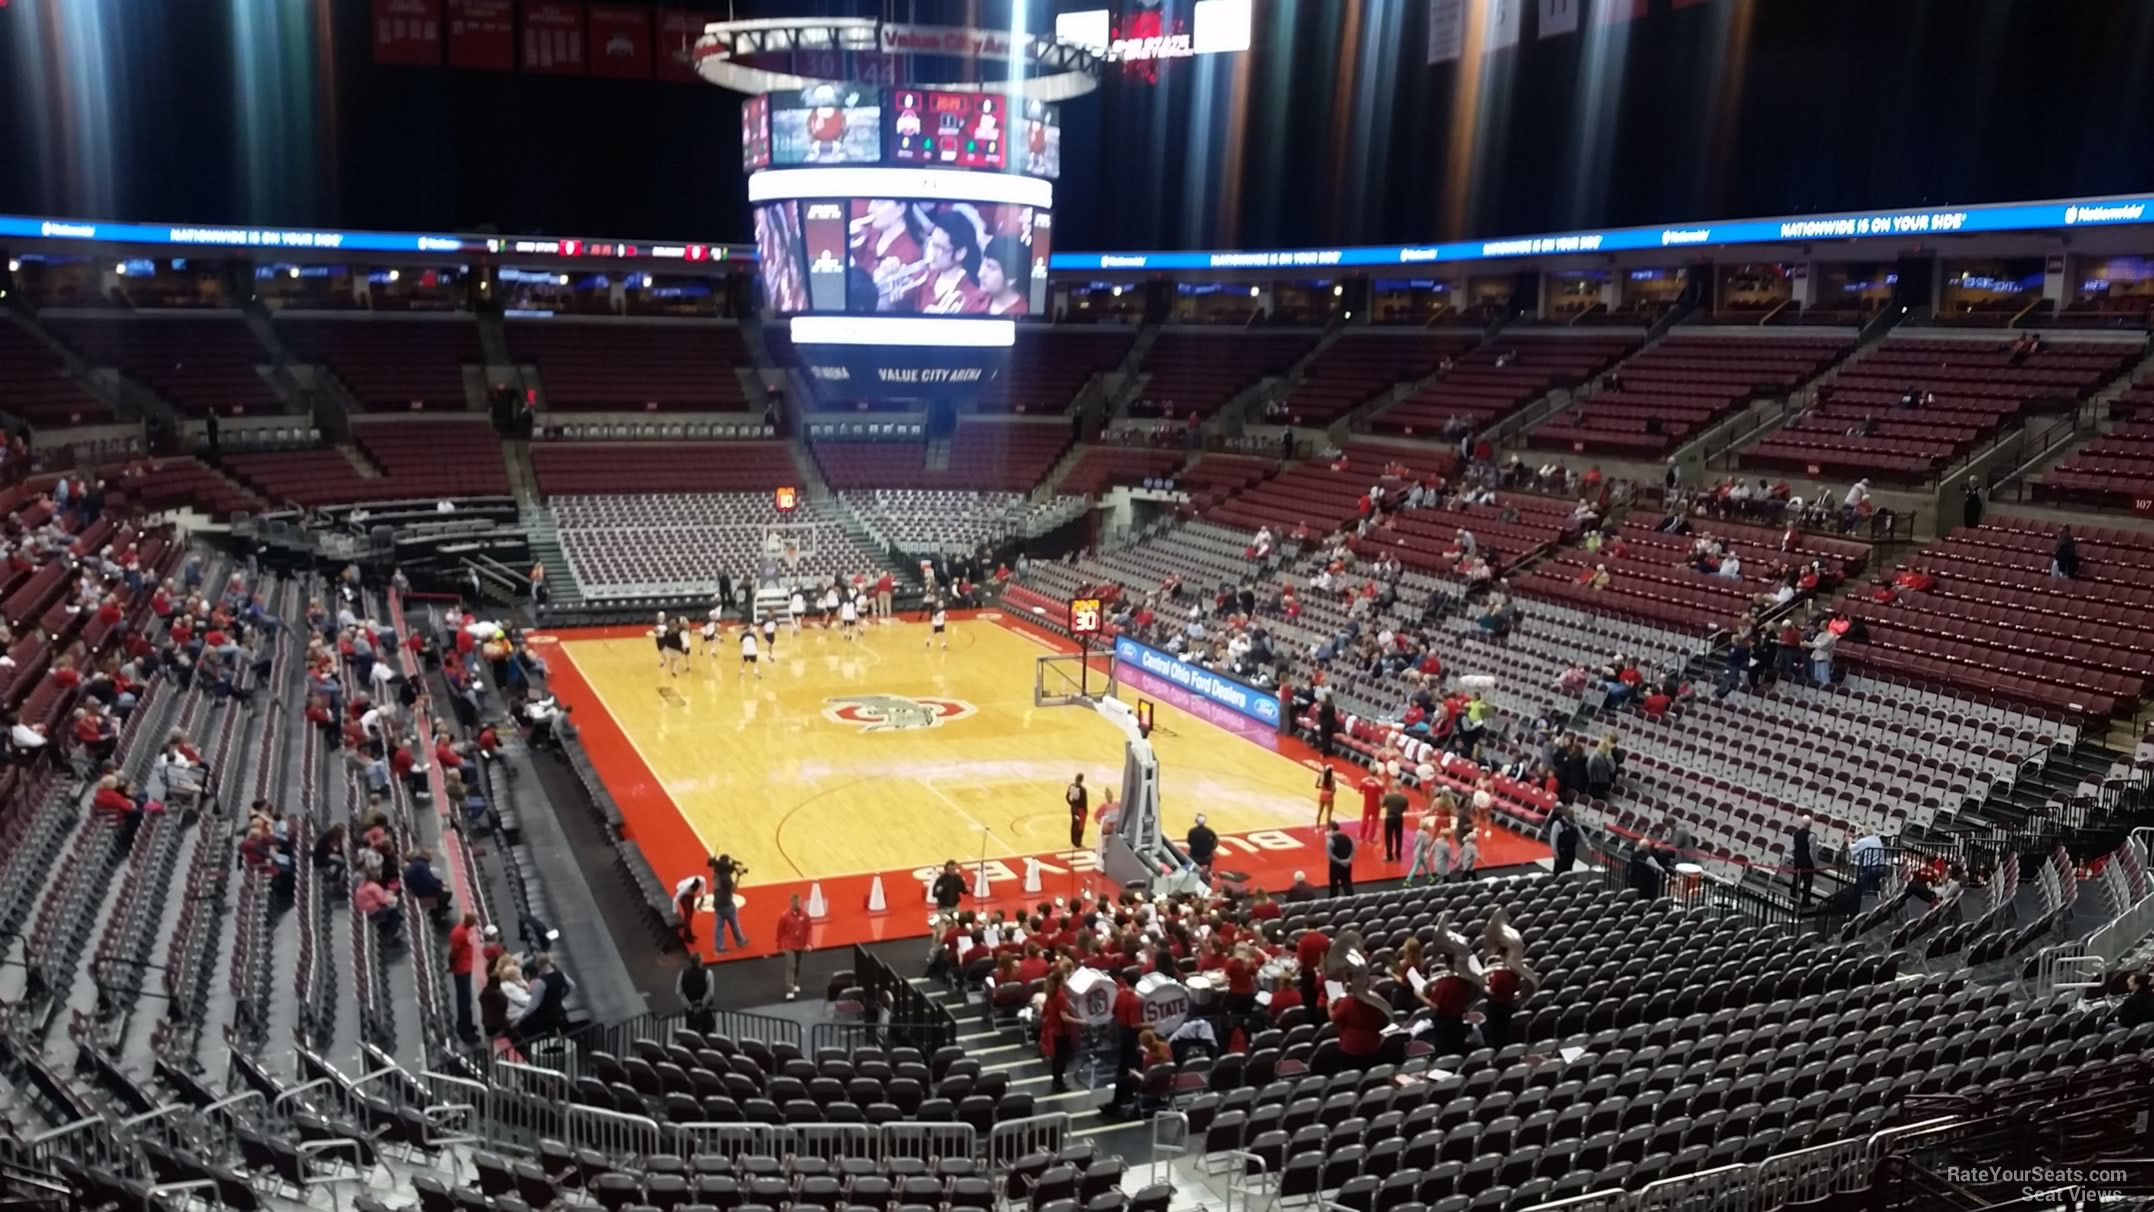 section 215, row p seat view  for basketball - schottenstein center